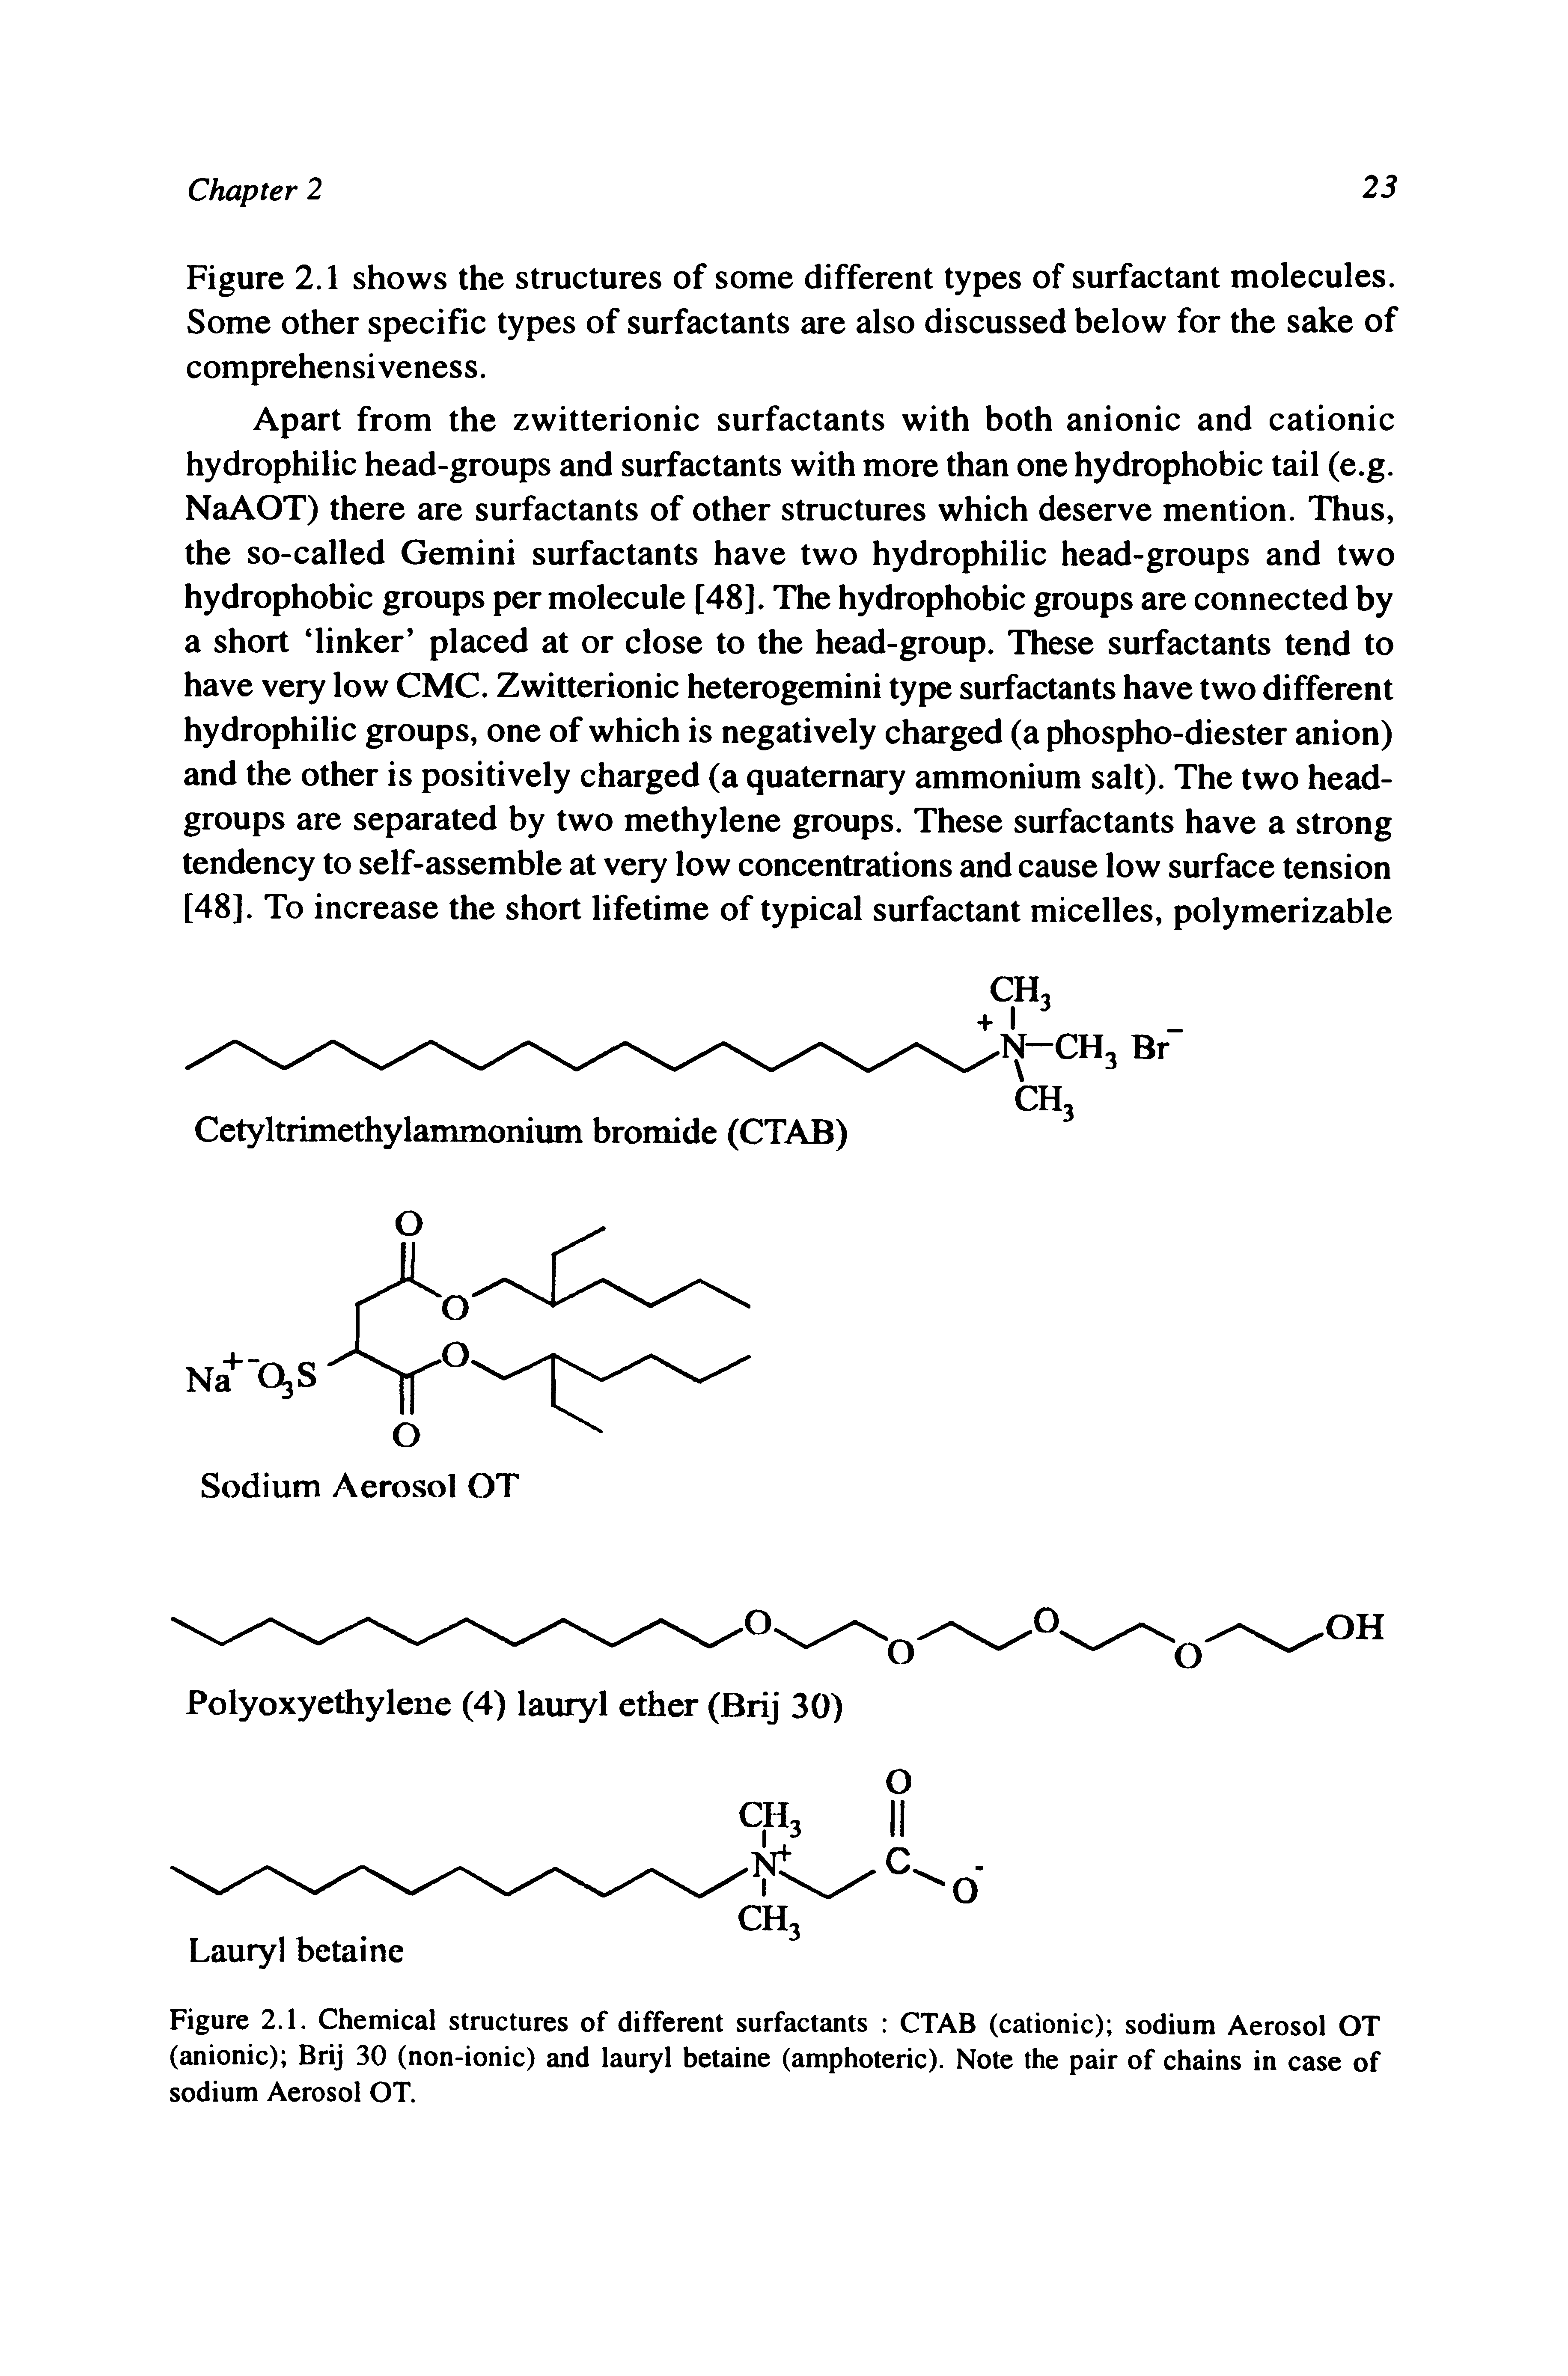 Figure 2.1. Chemical structures of different surfactants CTAB (cationic) sodium Aerosol OT (anionic) Brij 30 (non-ionic) and lauryl betaine (amphoteric). Note the pair of chains in case of sodium Aerosol OT.